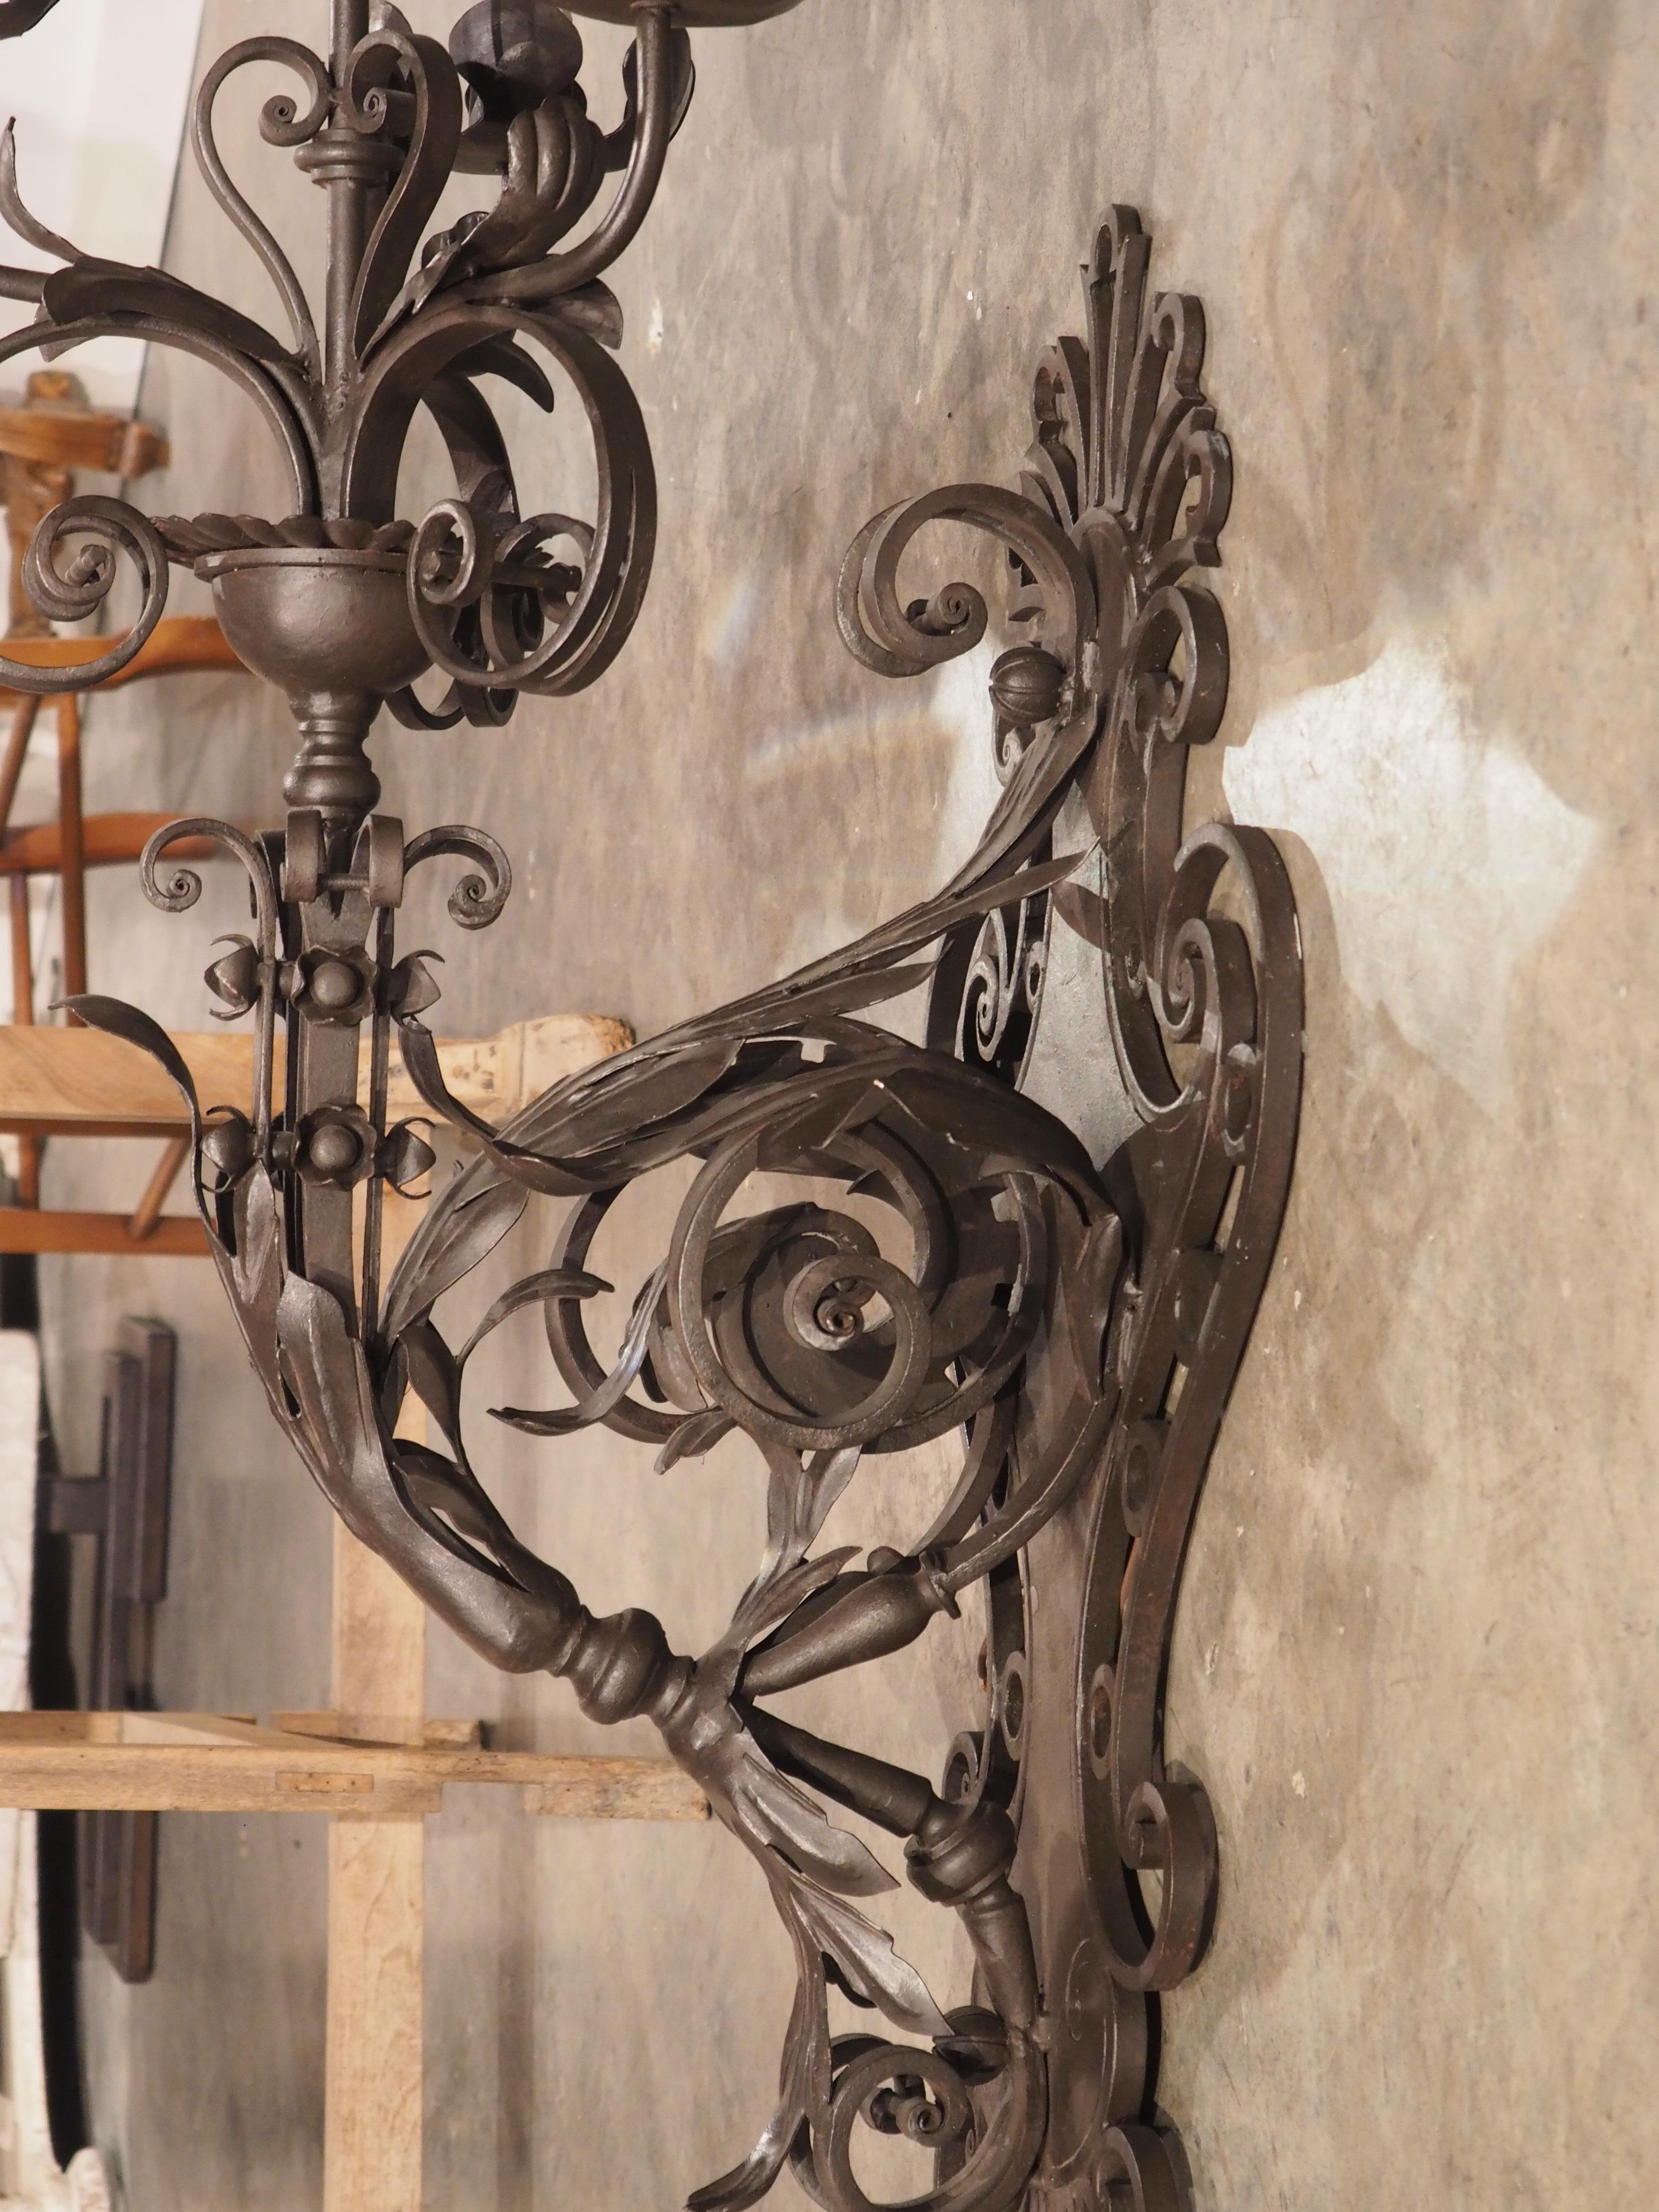 Wrought in the style of Spanish architectural lighting, this monumental iron four-light wall sconce is topped by white faux candle sleeves rising from saucer large, parted leaf bobeches atop gently curving arms. One light rises above the other three